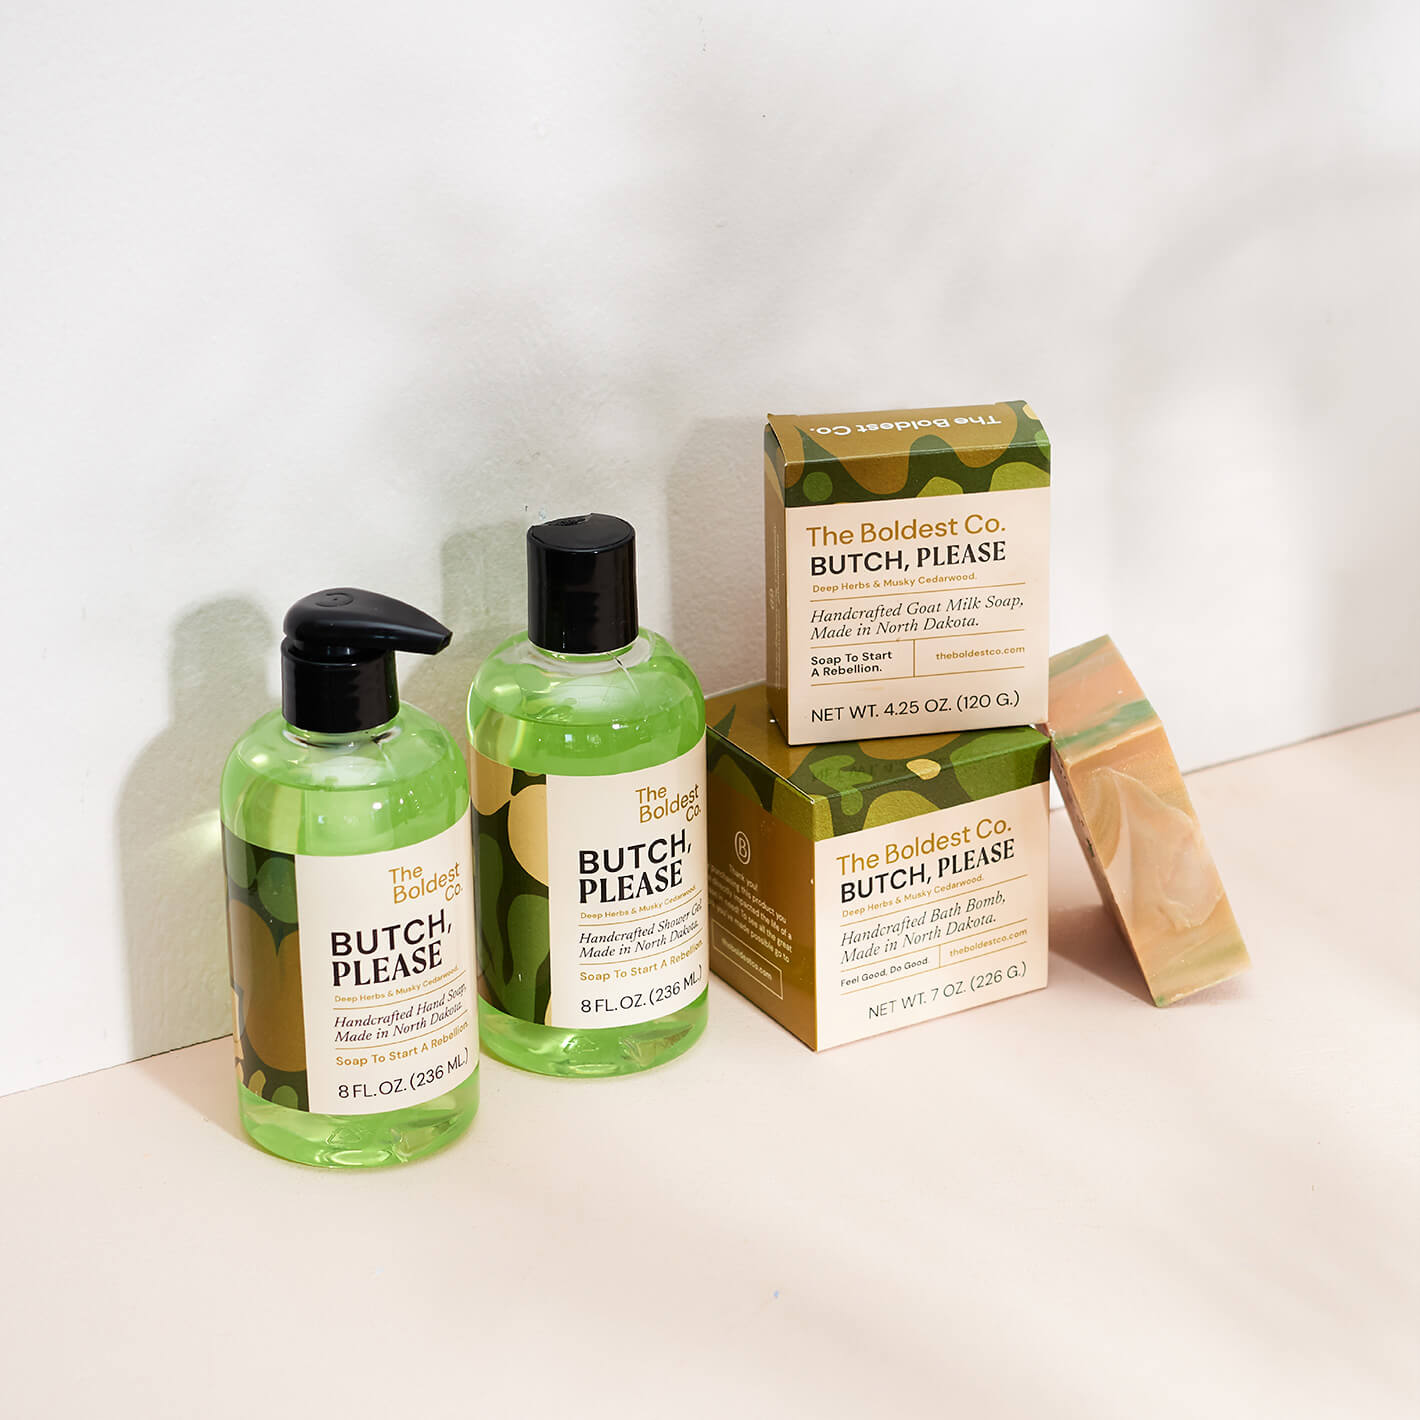 Brand identity case study image of The Boldest co’s ‘Butch, Please’ scent range. A hand wash, shower gel, soap box and bath bomb box feature green detailing and sit in a cream coloured background.